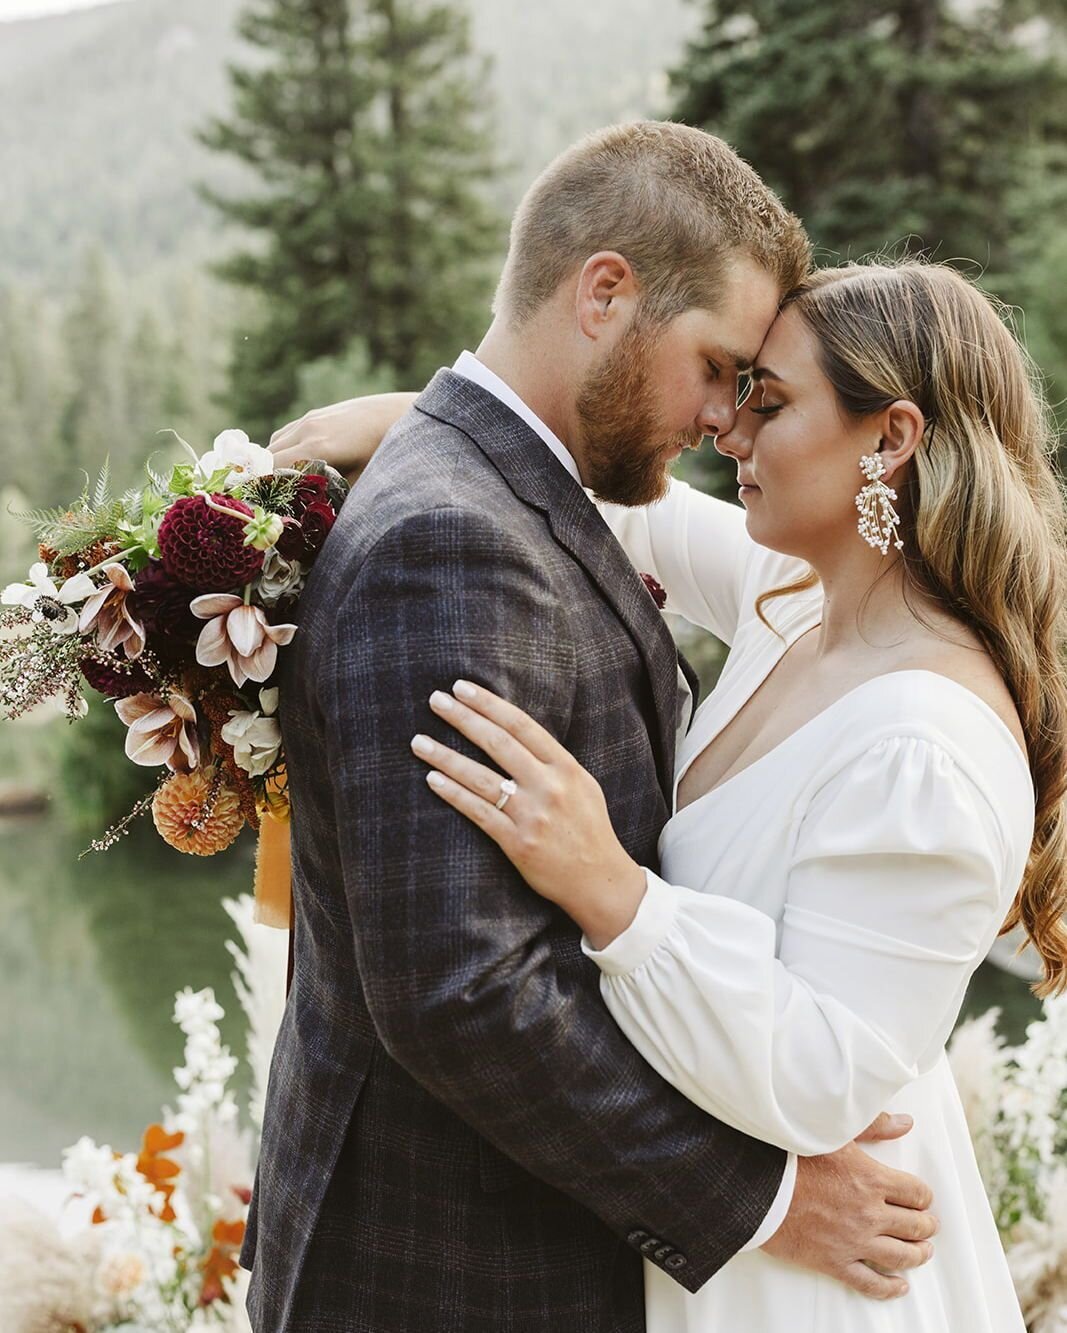 Happy Anniversary this beautiful couple! 🧡⁣
⁣
Stationery + Wedding Day Paper Goods | @hazeleyedesigns⁣
Planning + Design | @sugarwillowevents⁣
Venue | The Ranch at Emerald Valley @thebroadmoor⁣
Photography | @jayleighflood⁣
Videography | Cali Cutler